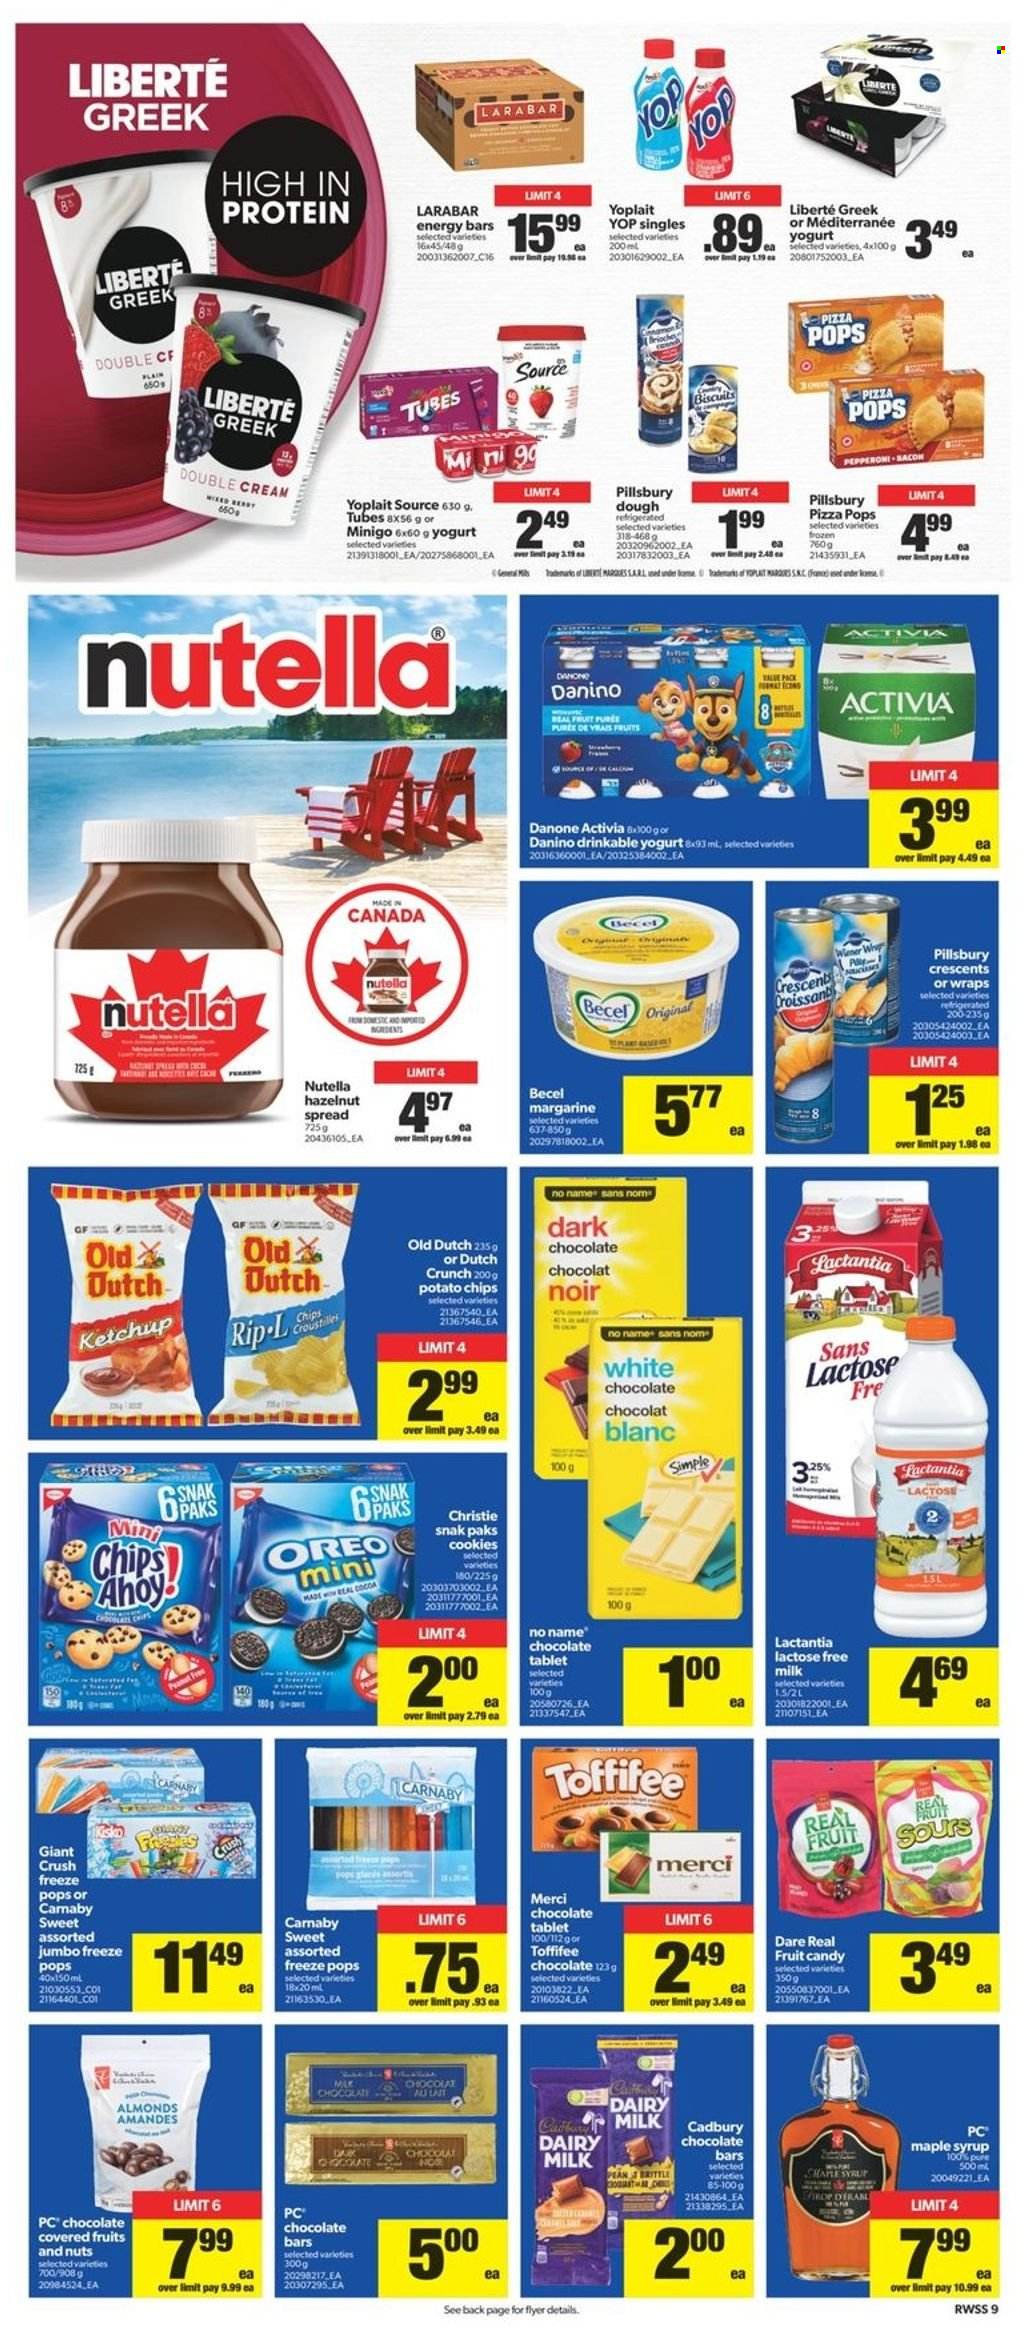 thumbnail - Real Canadian Superstore Flyer - May 19, 2022 - May 25, 2022 - Sales products - tablet, wraps, No Name, pizza, Pillsbury, yoghurt, Activia, Yoplait, lactose free milk, margarine, cookies, white chocolate, biscuit, dark chocolate, Cadbury, Merci, Dairy Milk, chocolate bar, potato chips, energy bar, maple syrup, syrup, almonds, ketchup, Nutella, Oreo, Danone. Page 9.